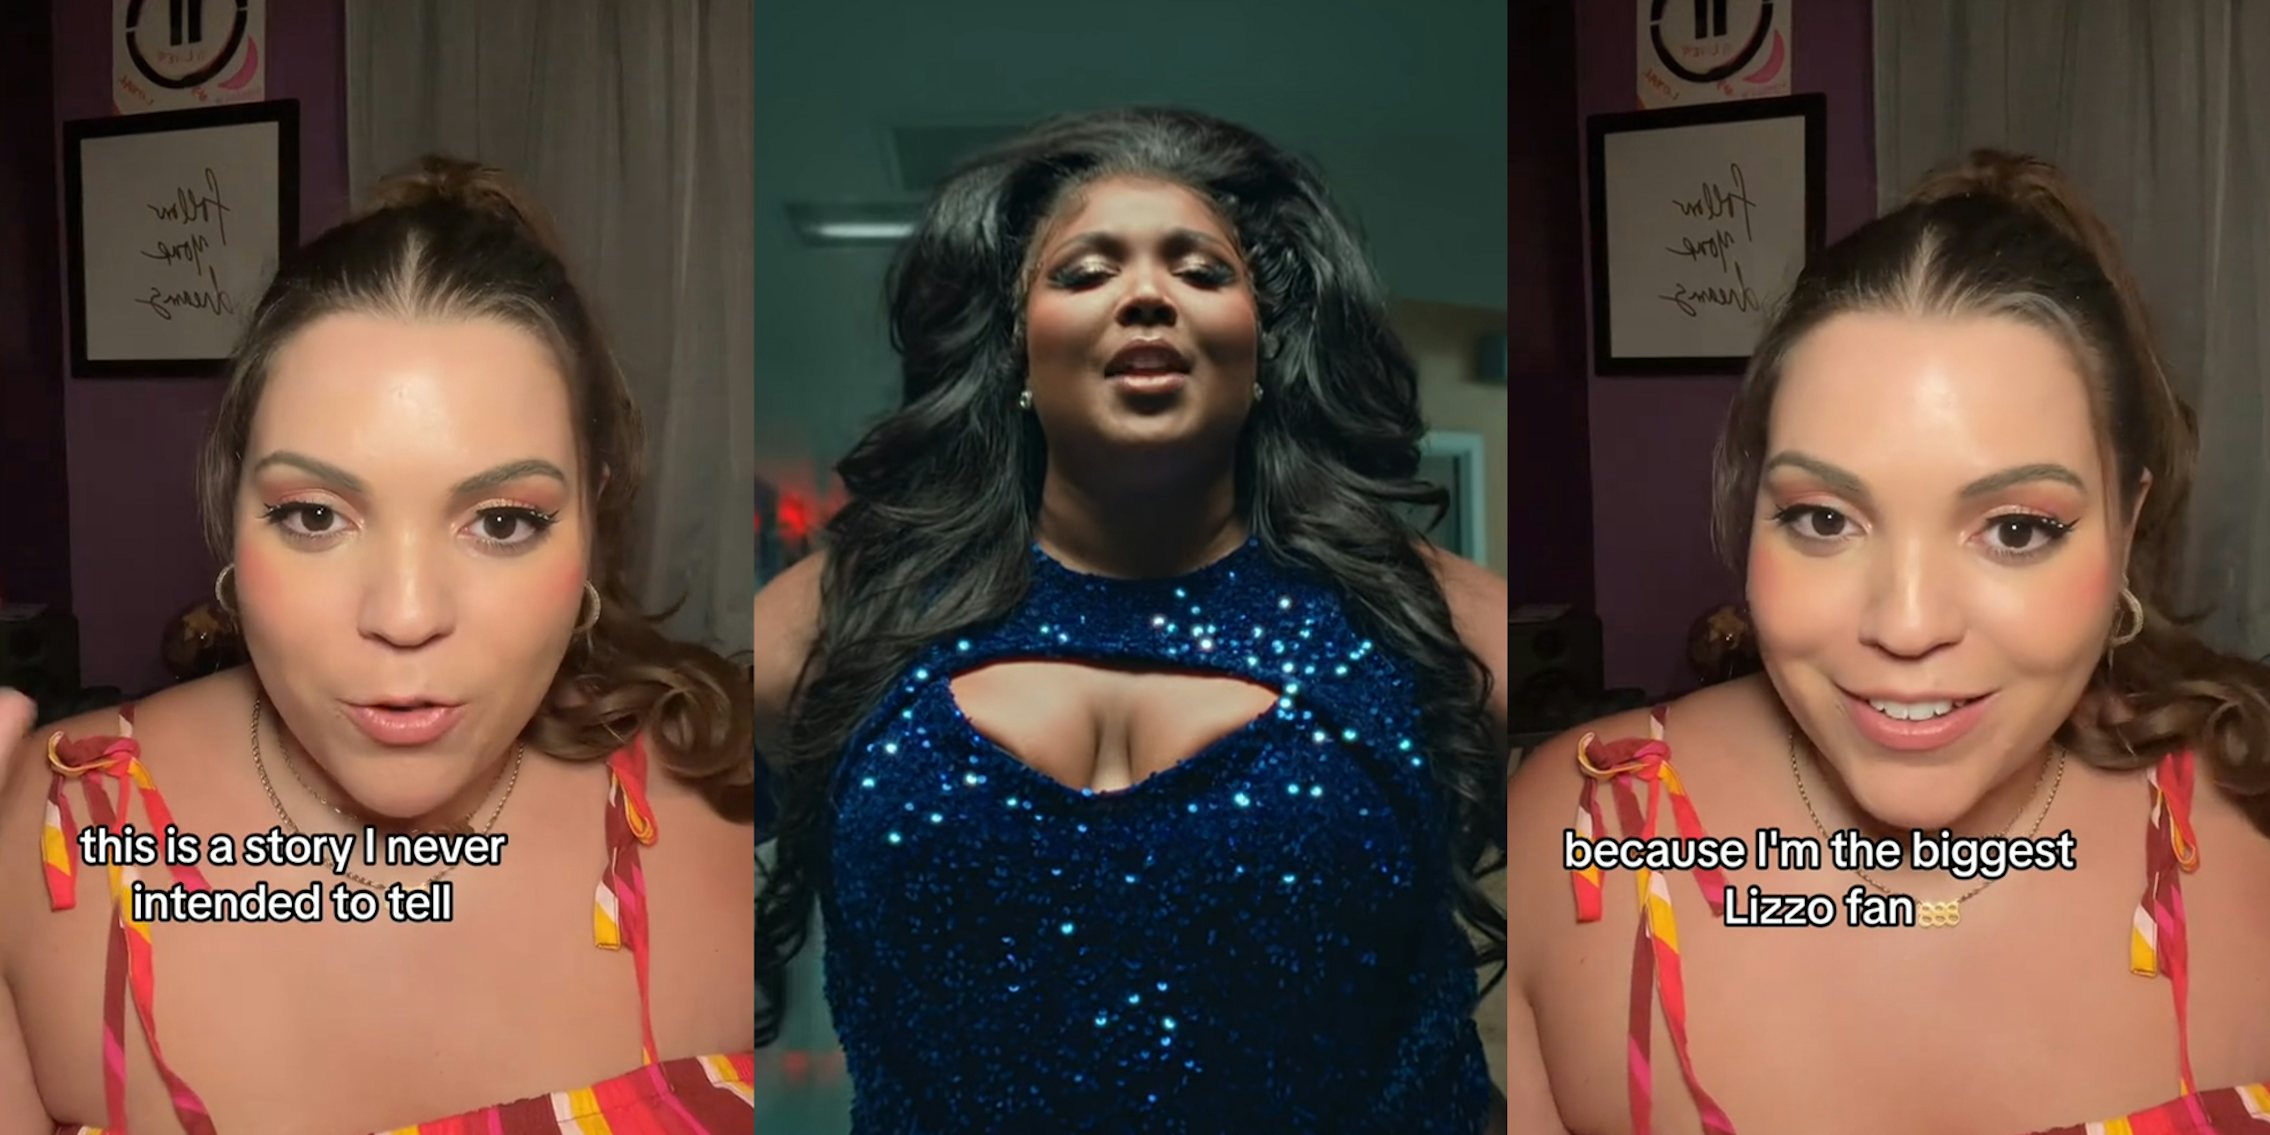 Singer claims Lizzo copied some of her ideas for songs/aesthetics